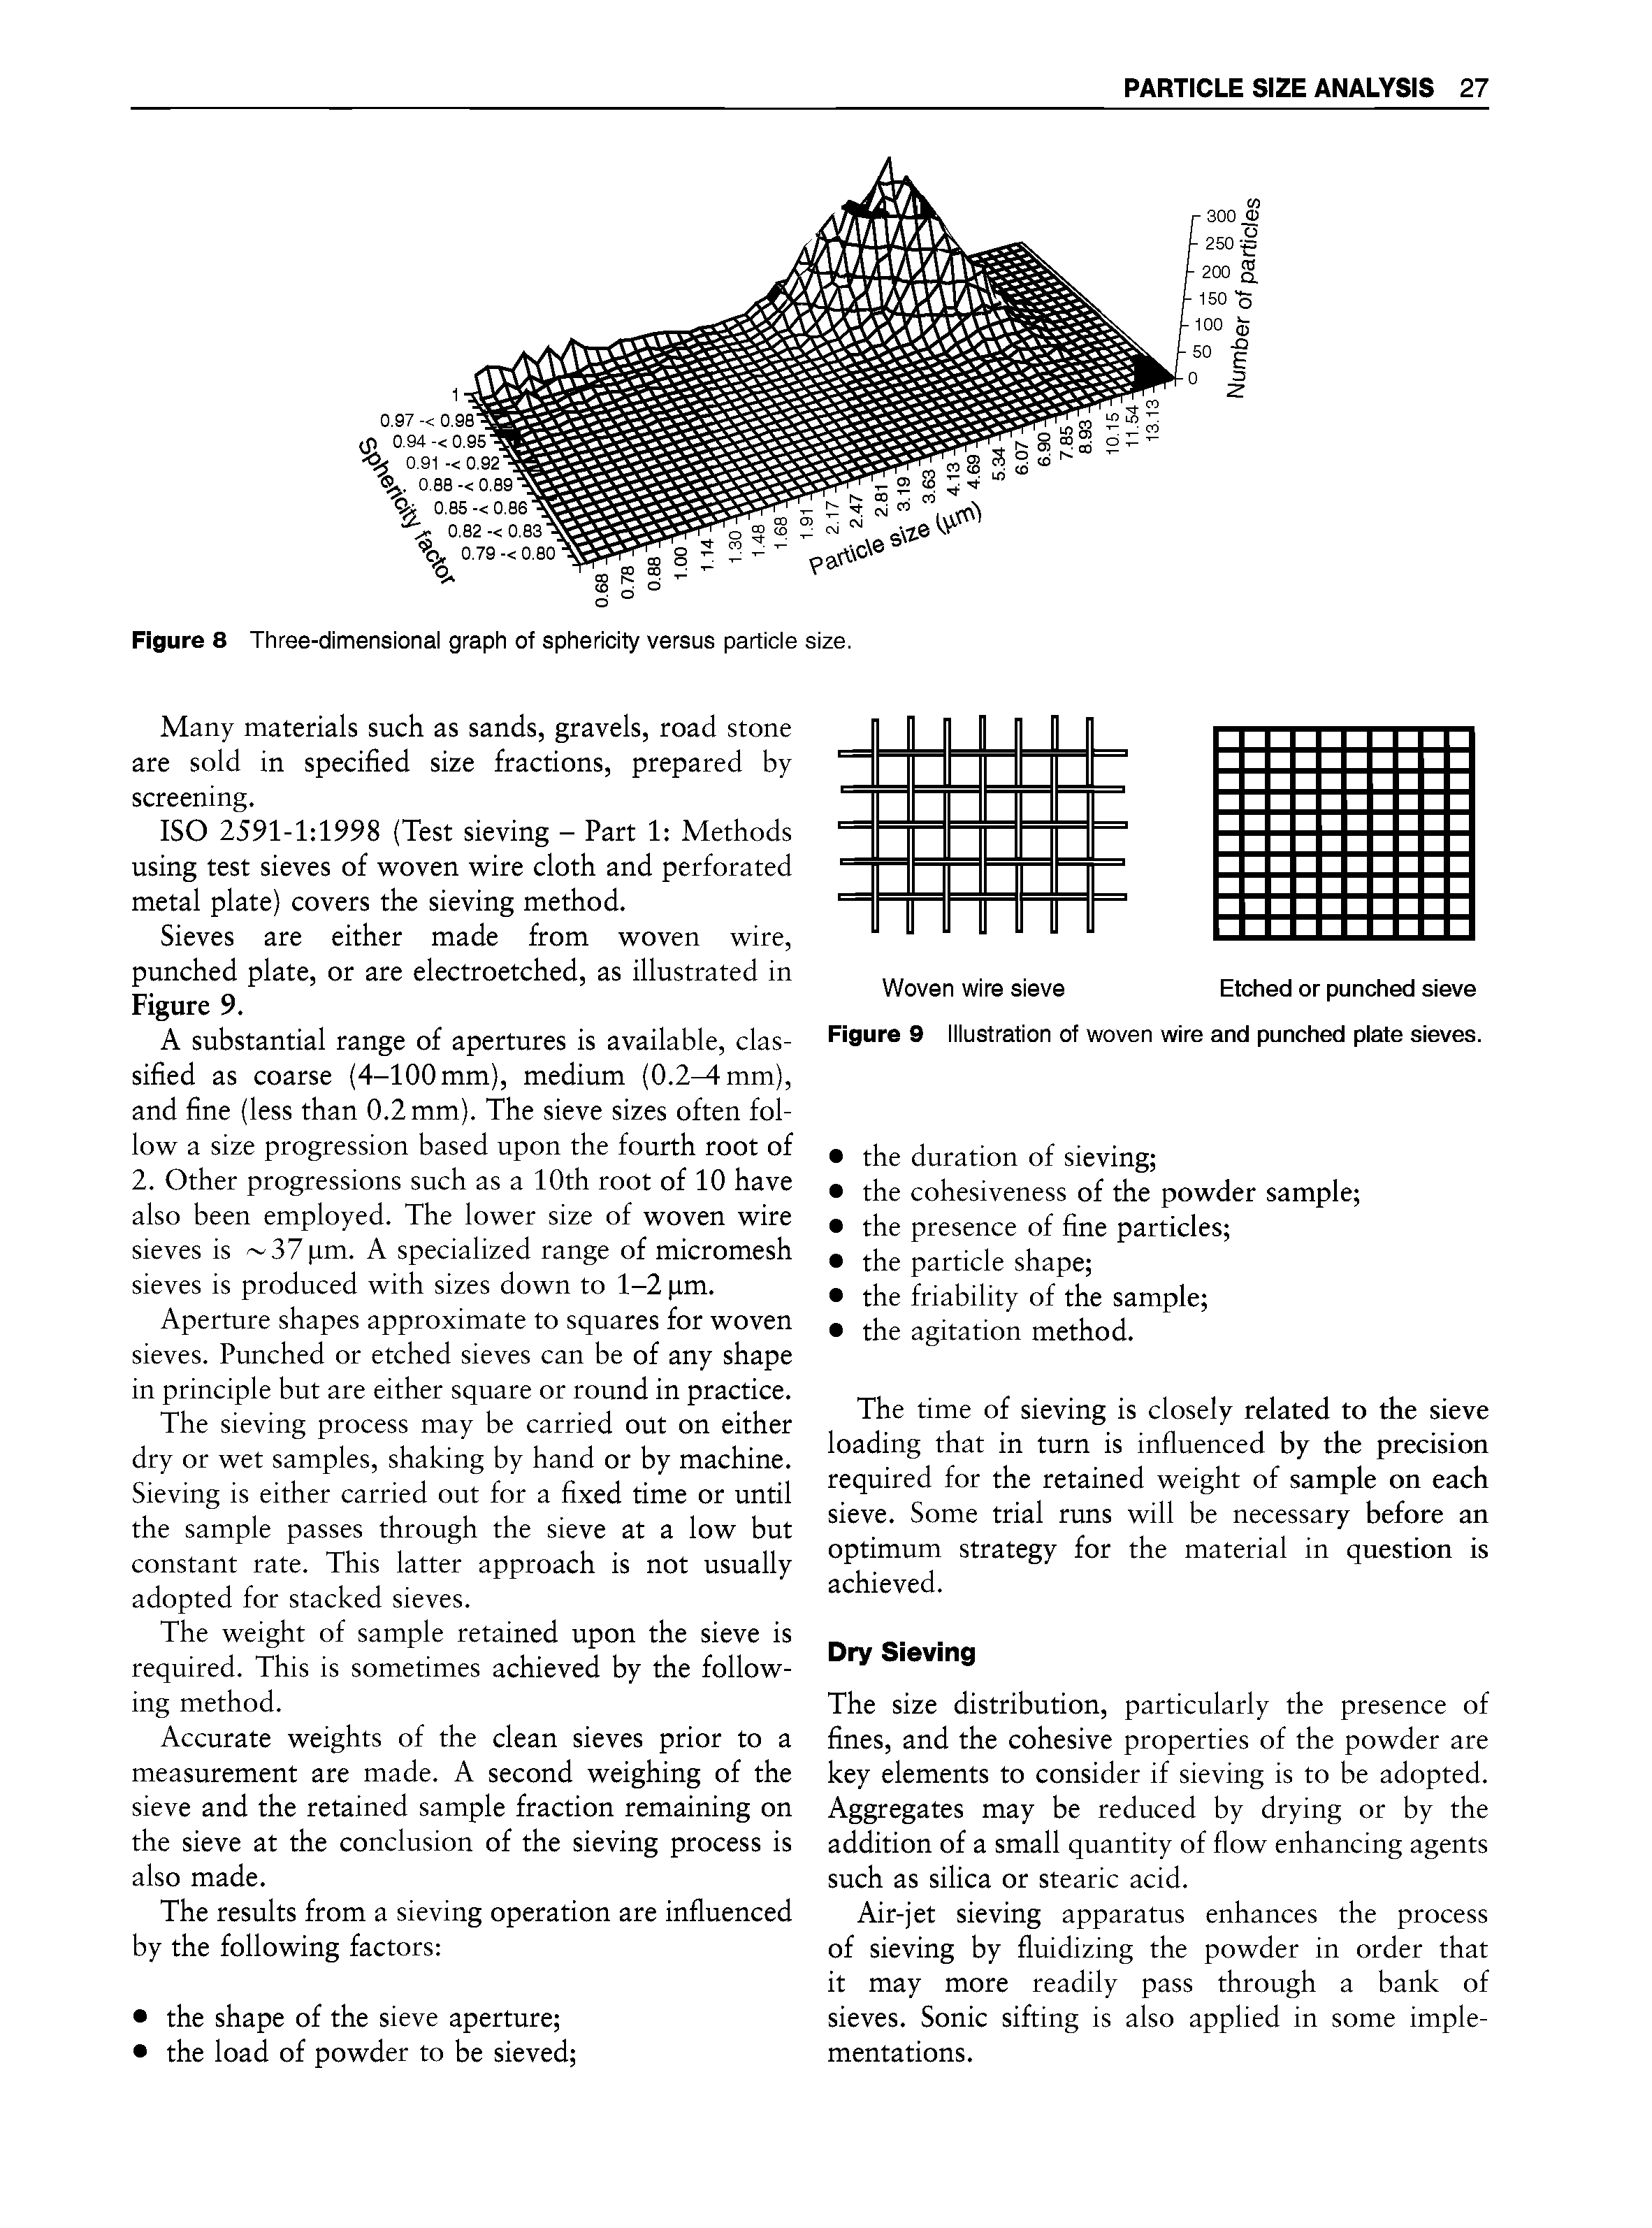 Figure 9 Illustration of woven wire and punched plate sieves.